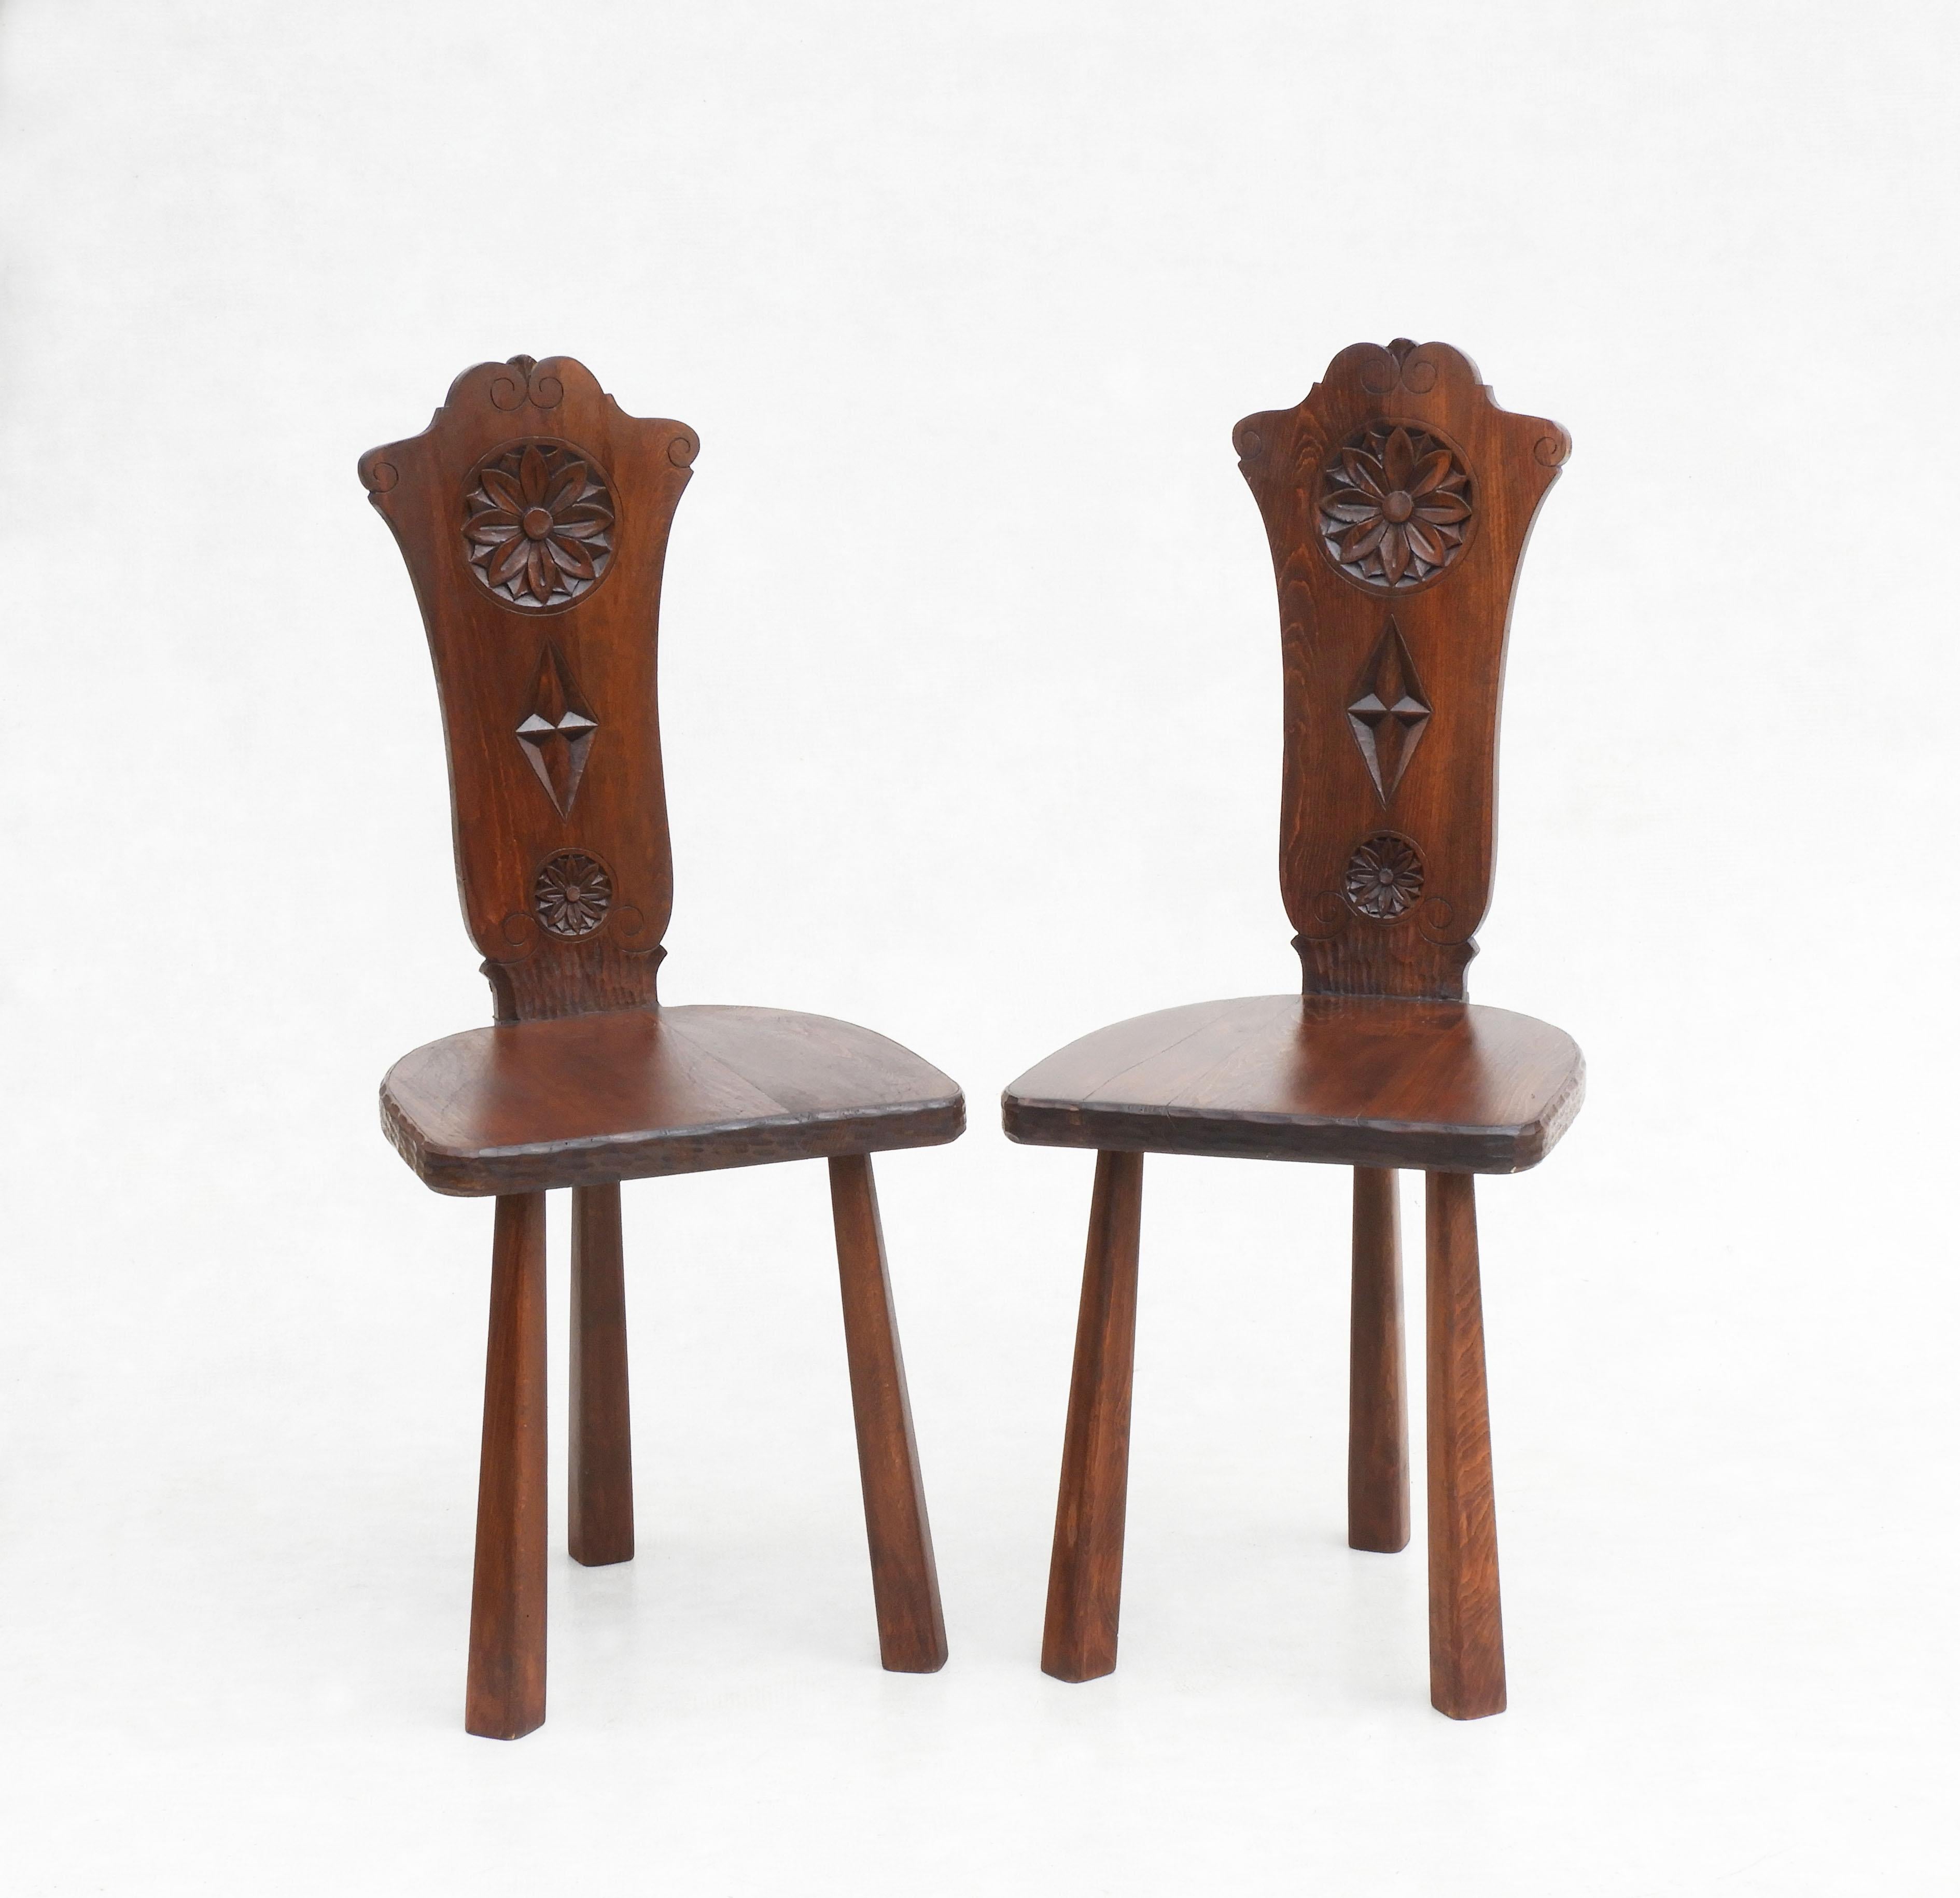 A fabulous pair of oak three-legged chairs, crafted in the Basque region of France/Spain C1950.  Beautifully decorated with carved flowers and diamond detailing, these chairs are a really nice example of mid-century West European Folk Art, in great